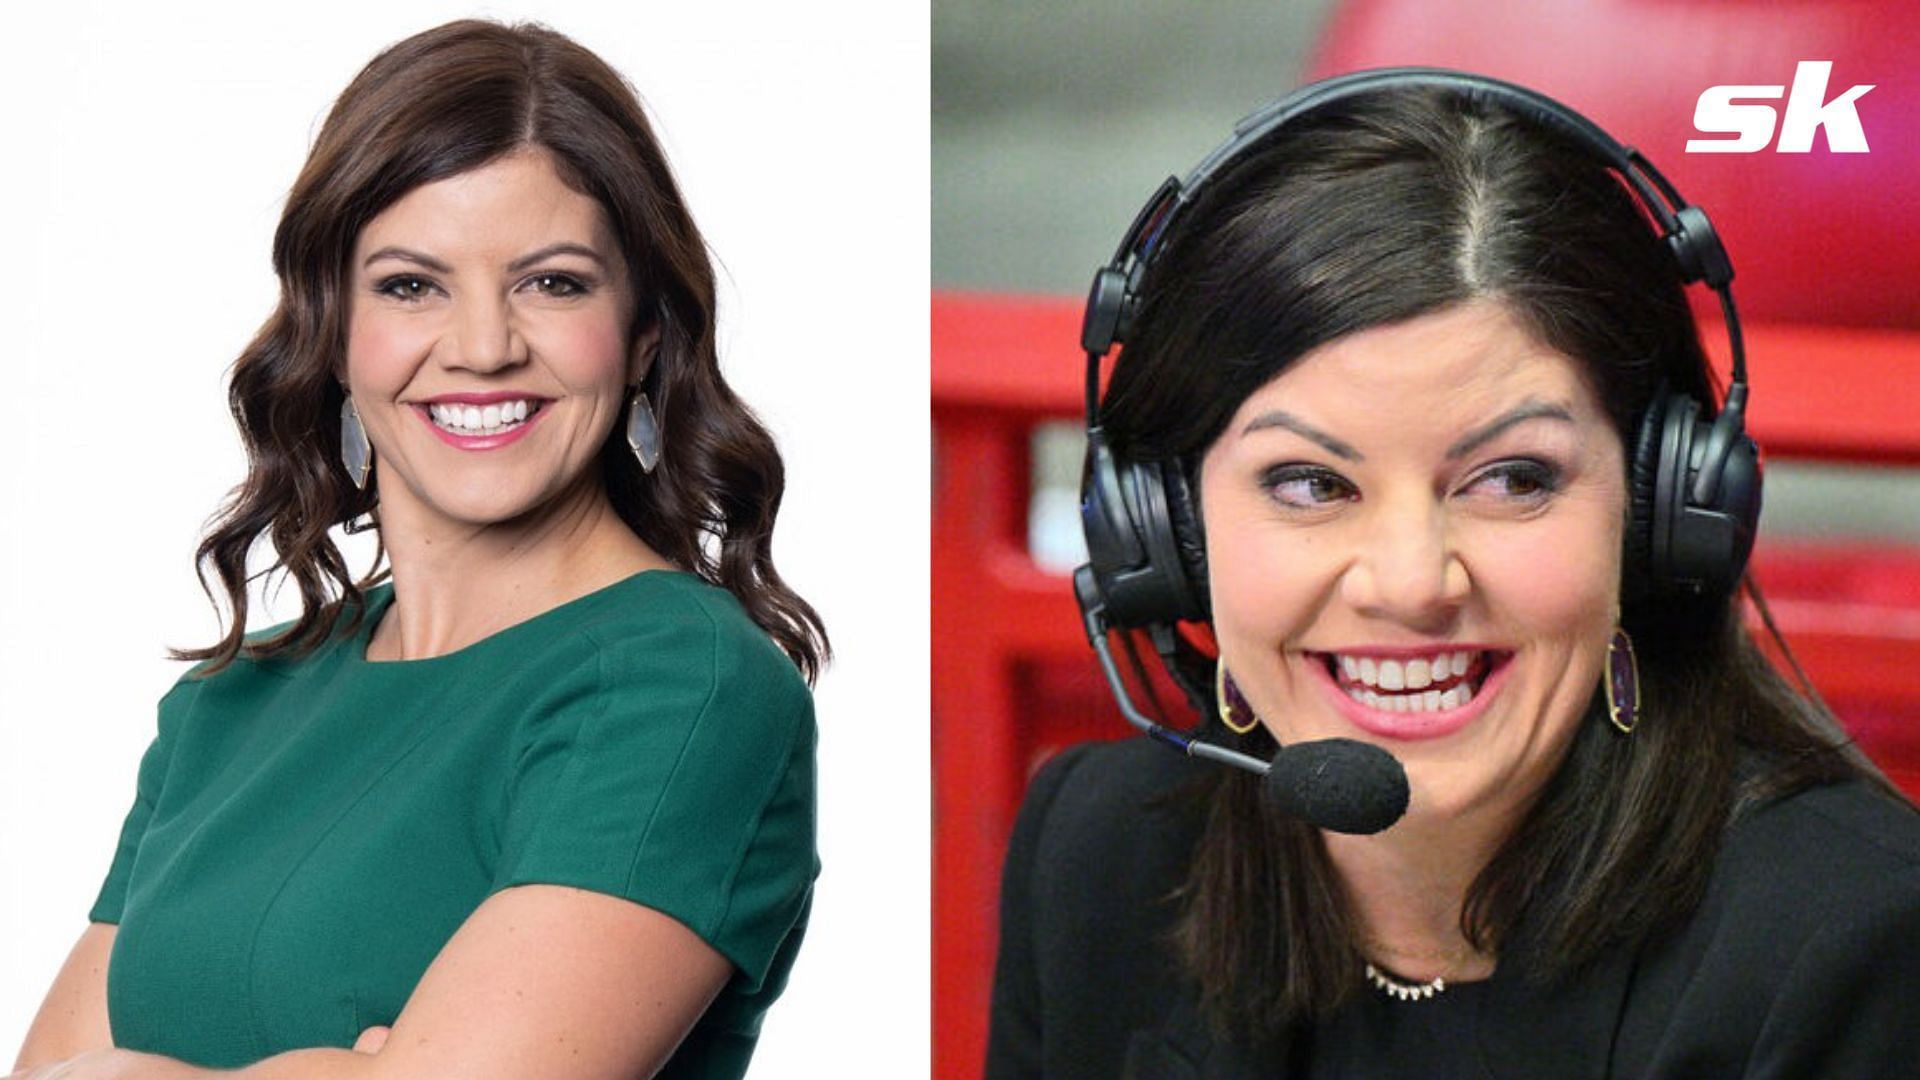 Jenny Cavnar will become the first full-time woman play-by-play commentator in MLB history